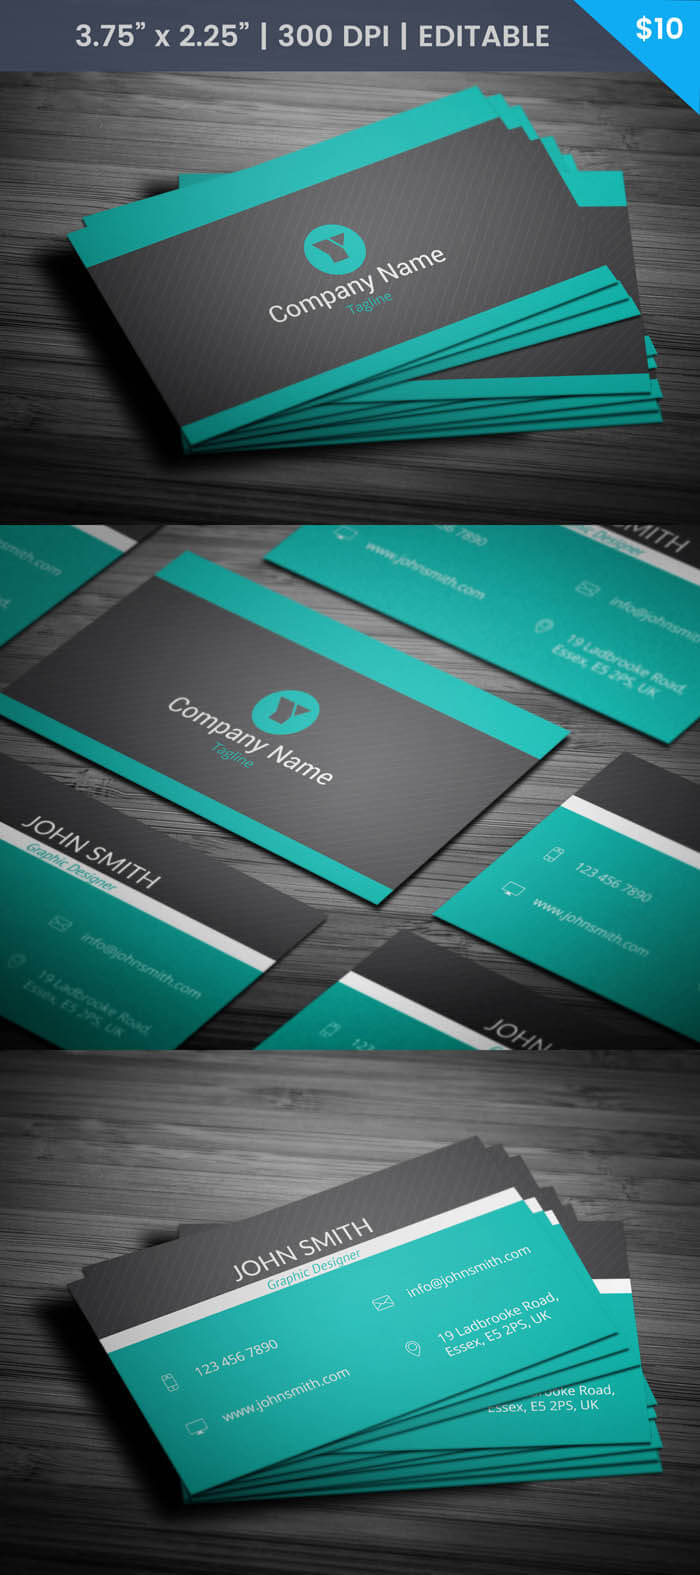 Free Massage Therapist Business Card In Massage Therapy Business Card Templates